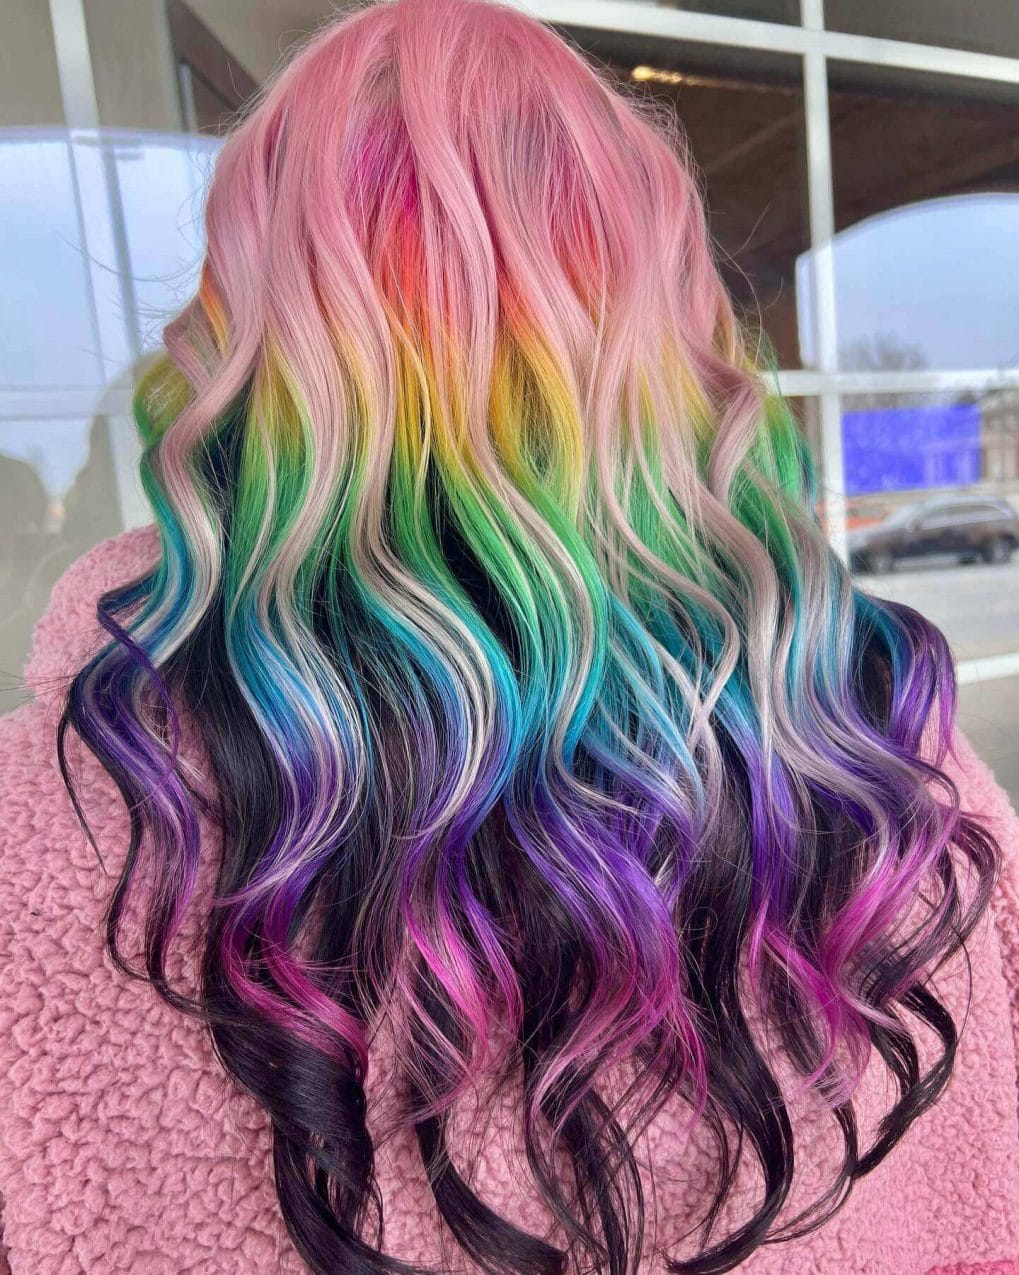 Vibrant rainbow-colored waves blending from pink to purple